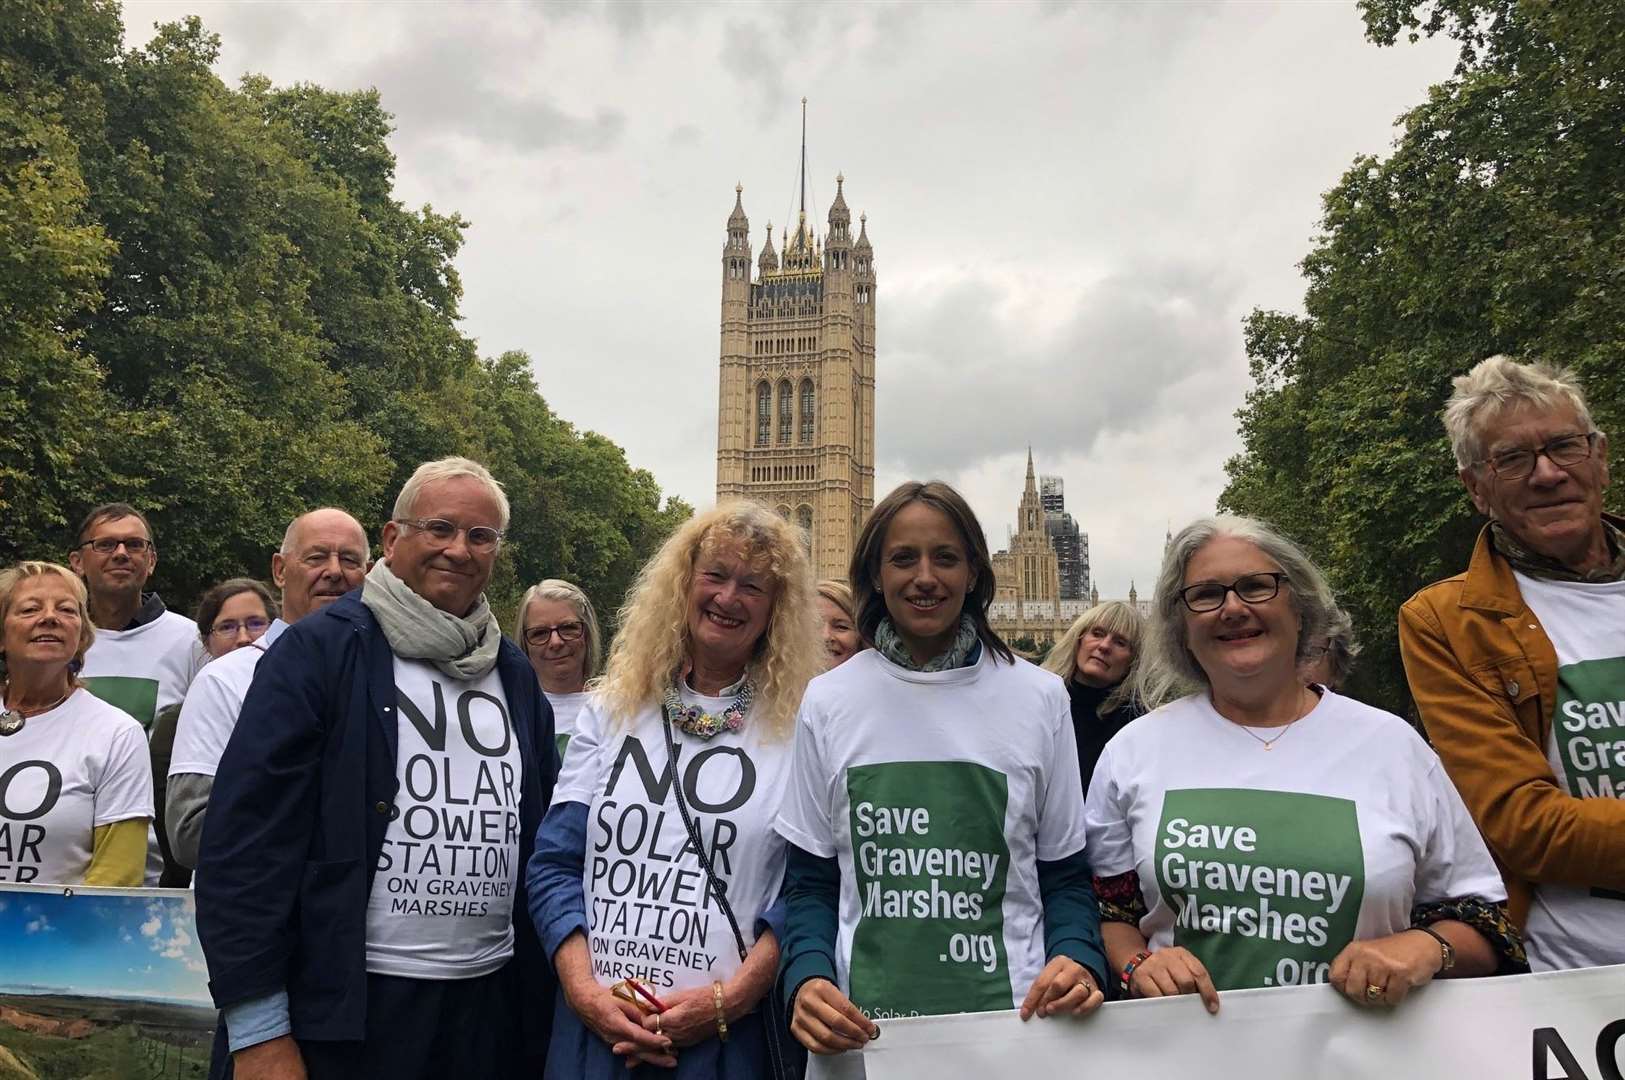 MP Helen Whately joined the campaign against the approval of Cleve Hill Solar Park, near Faversham